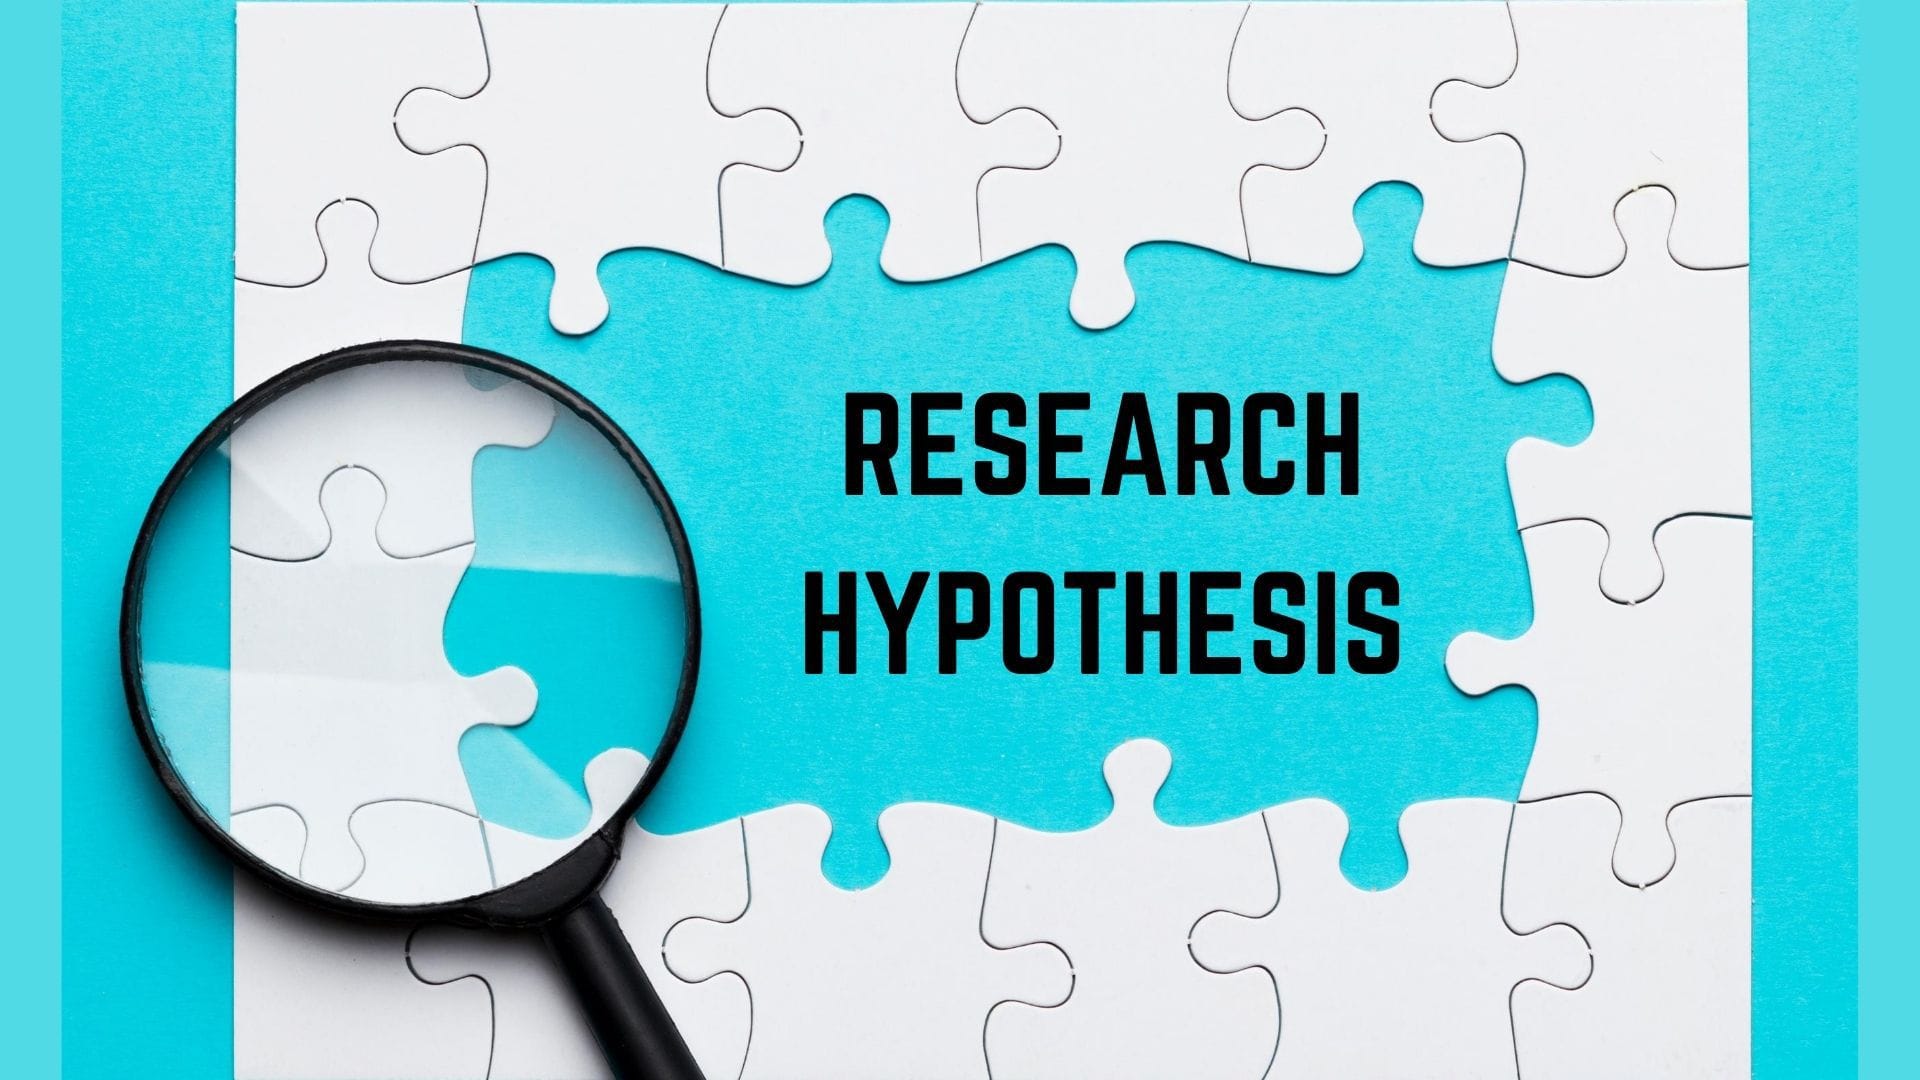 what are the importance of research hypothesis